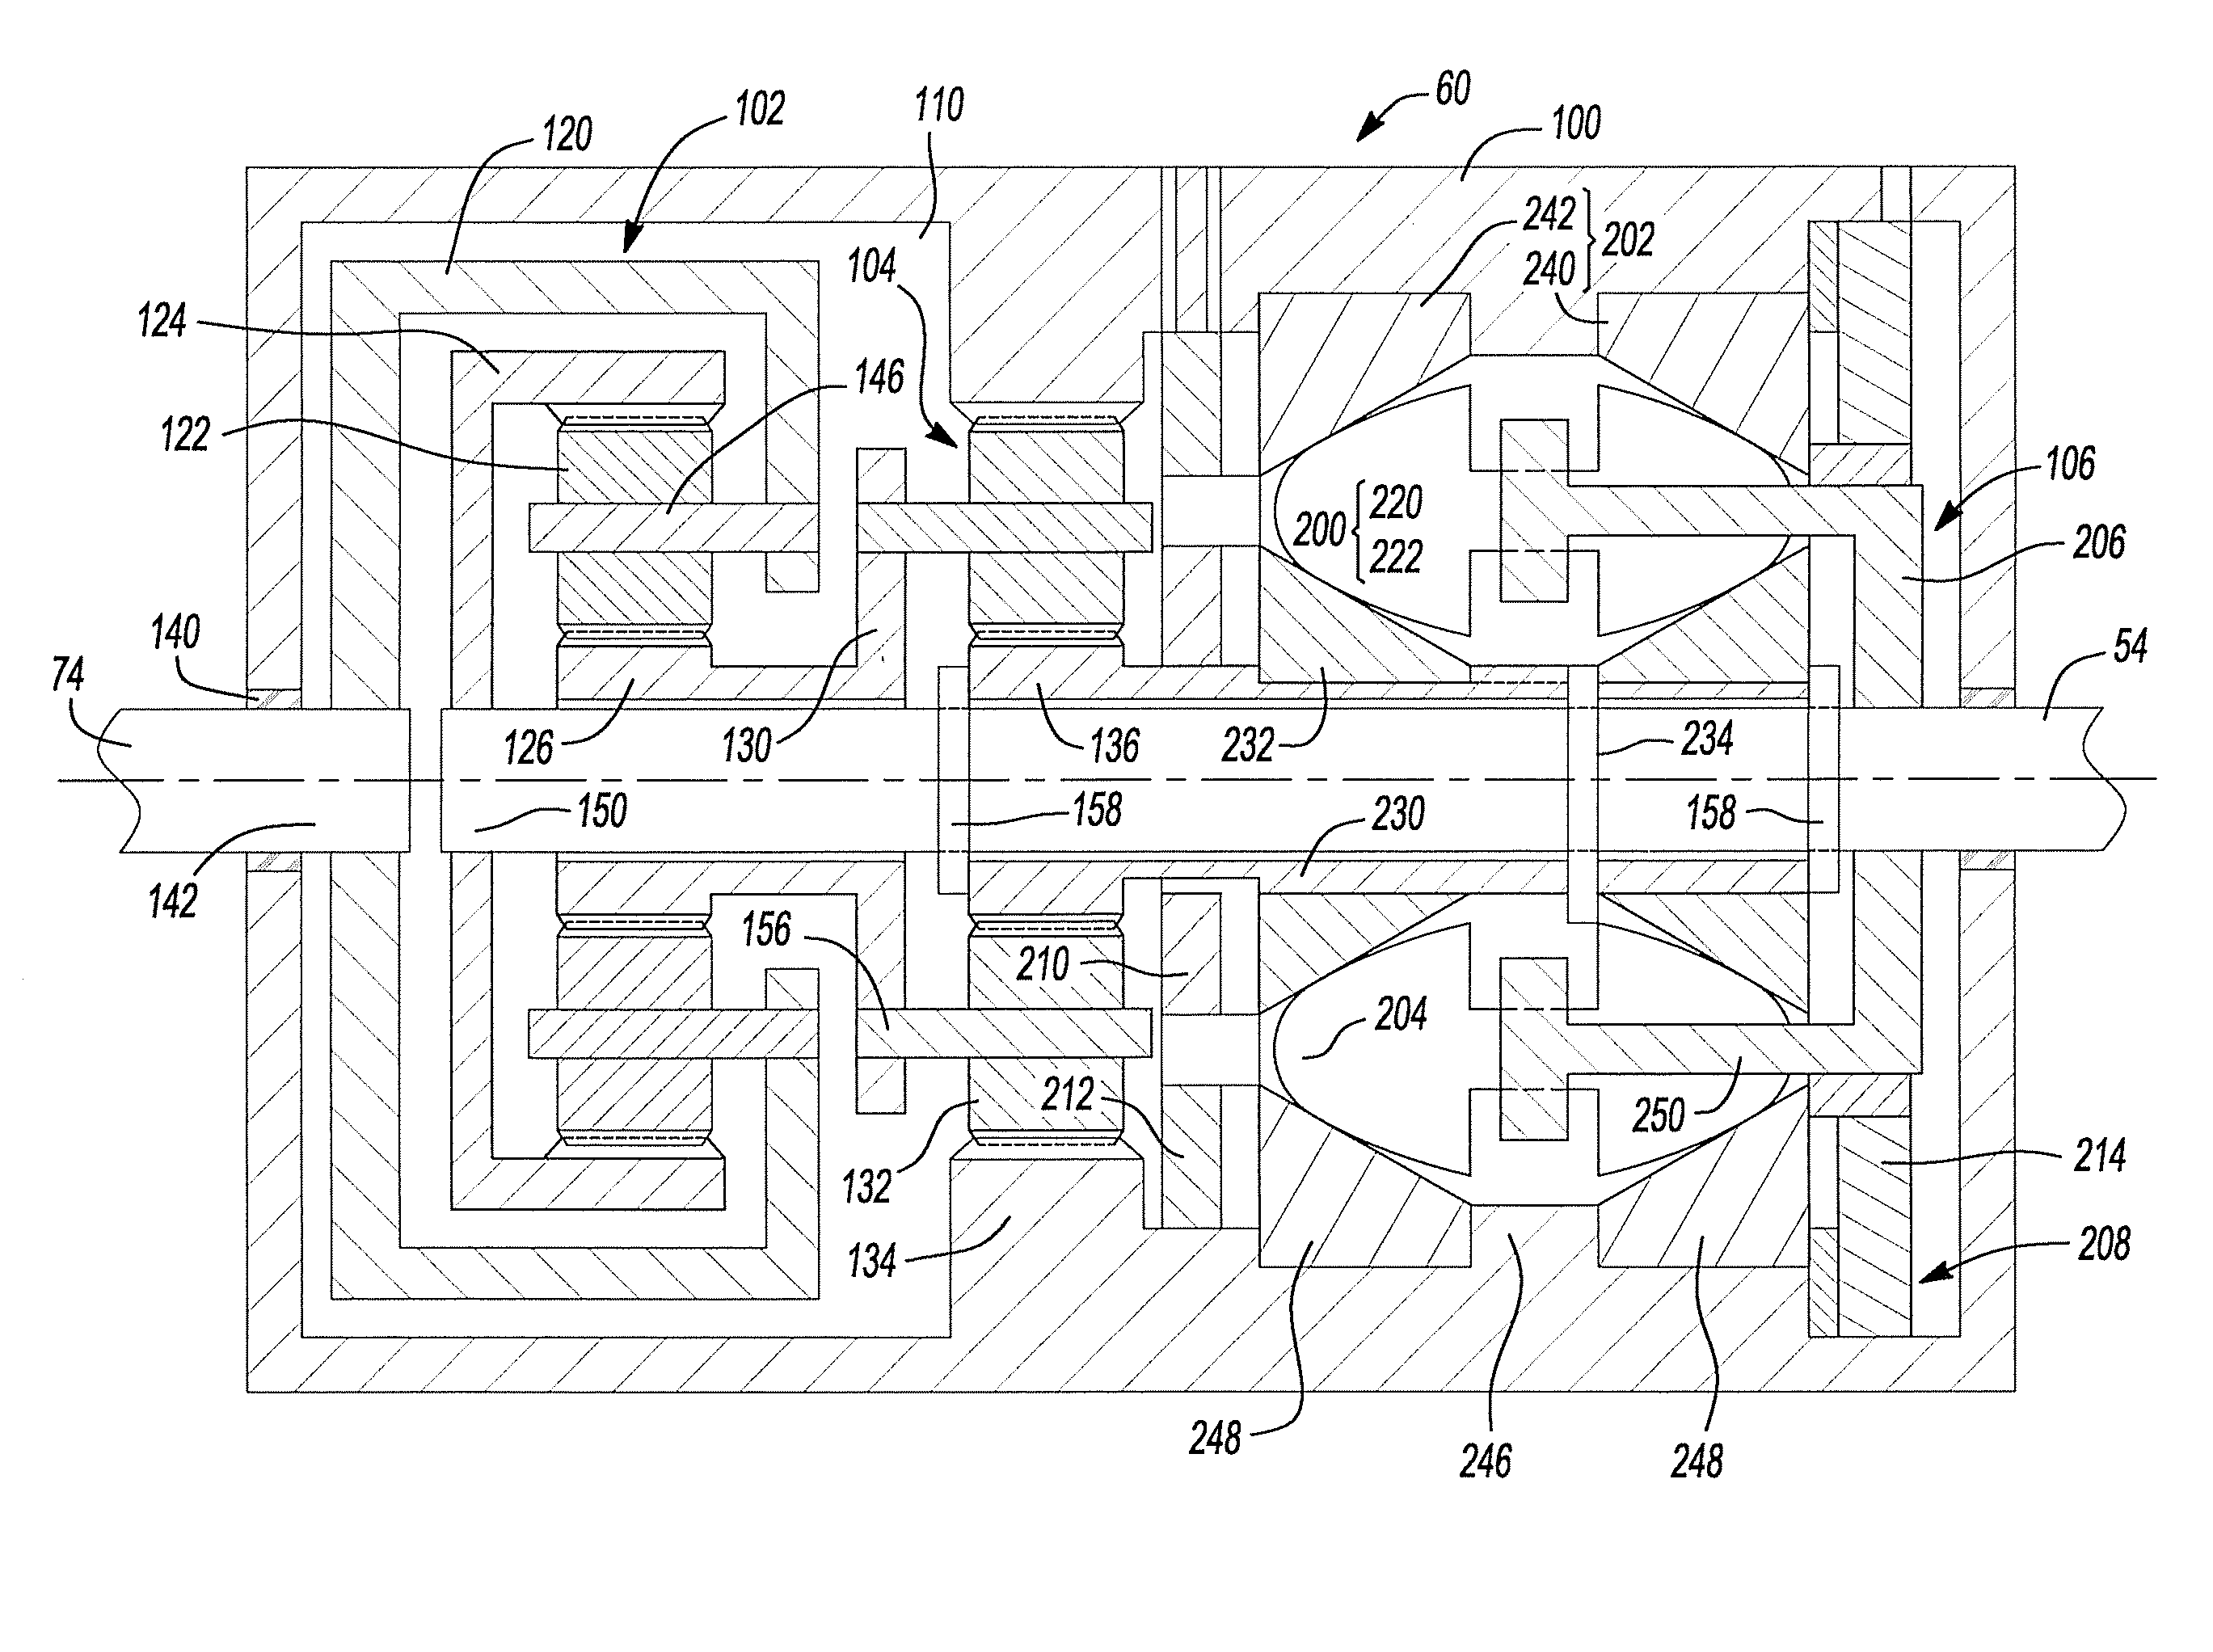 Continuously variable torque vectoring axle assembly